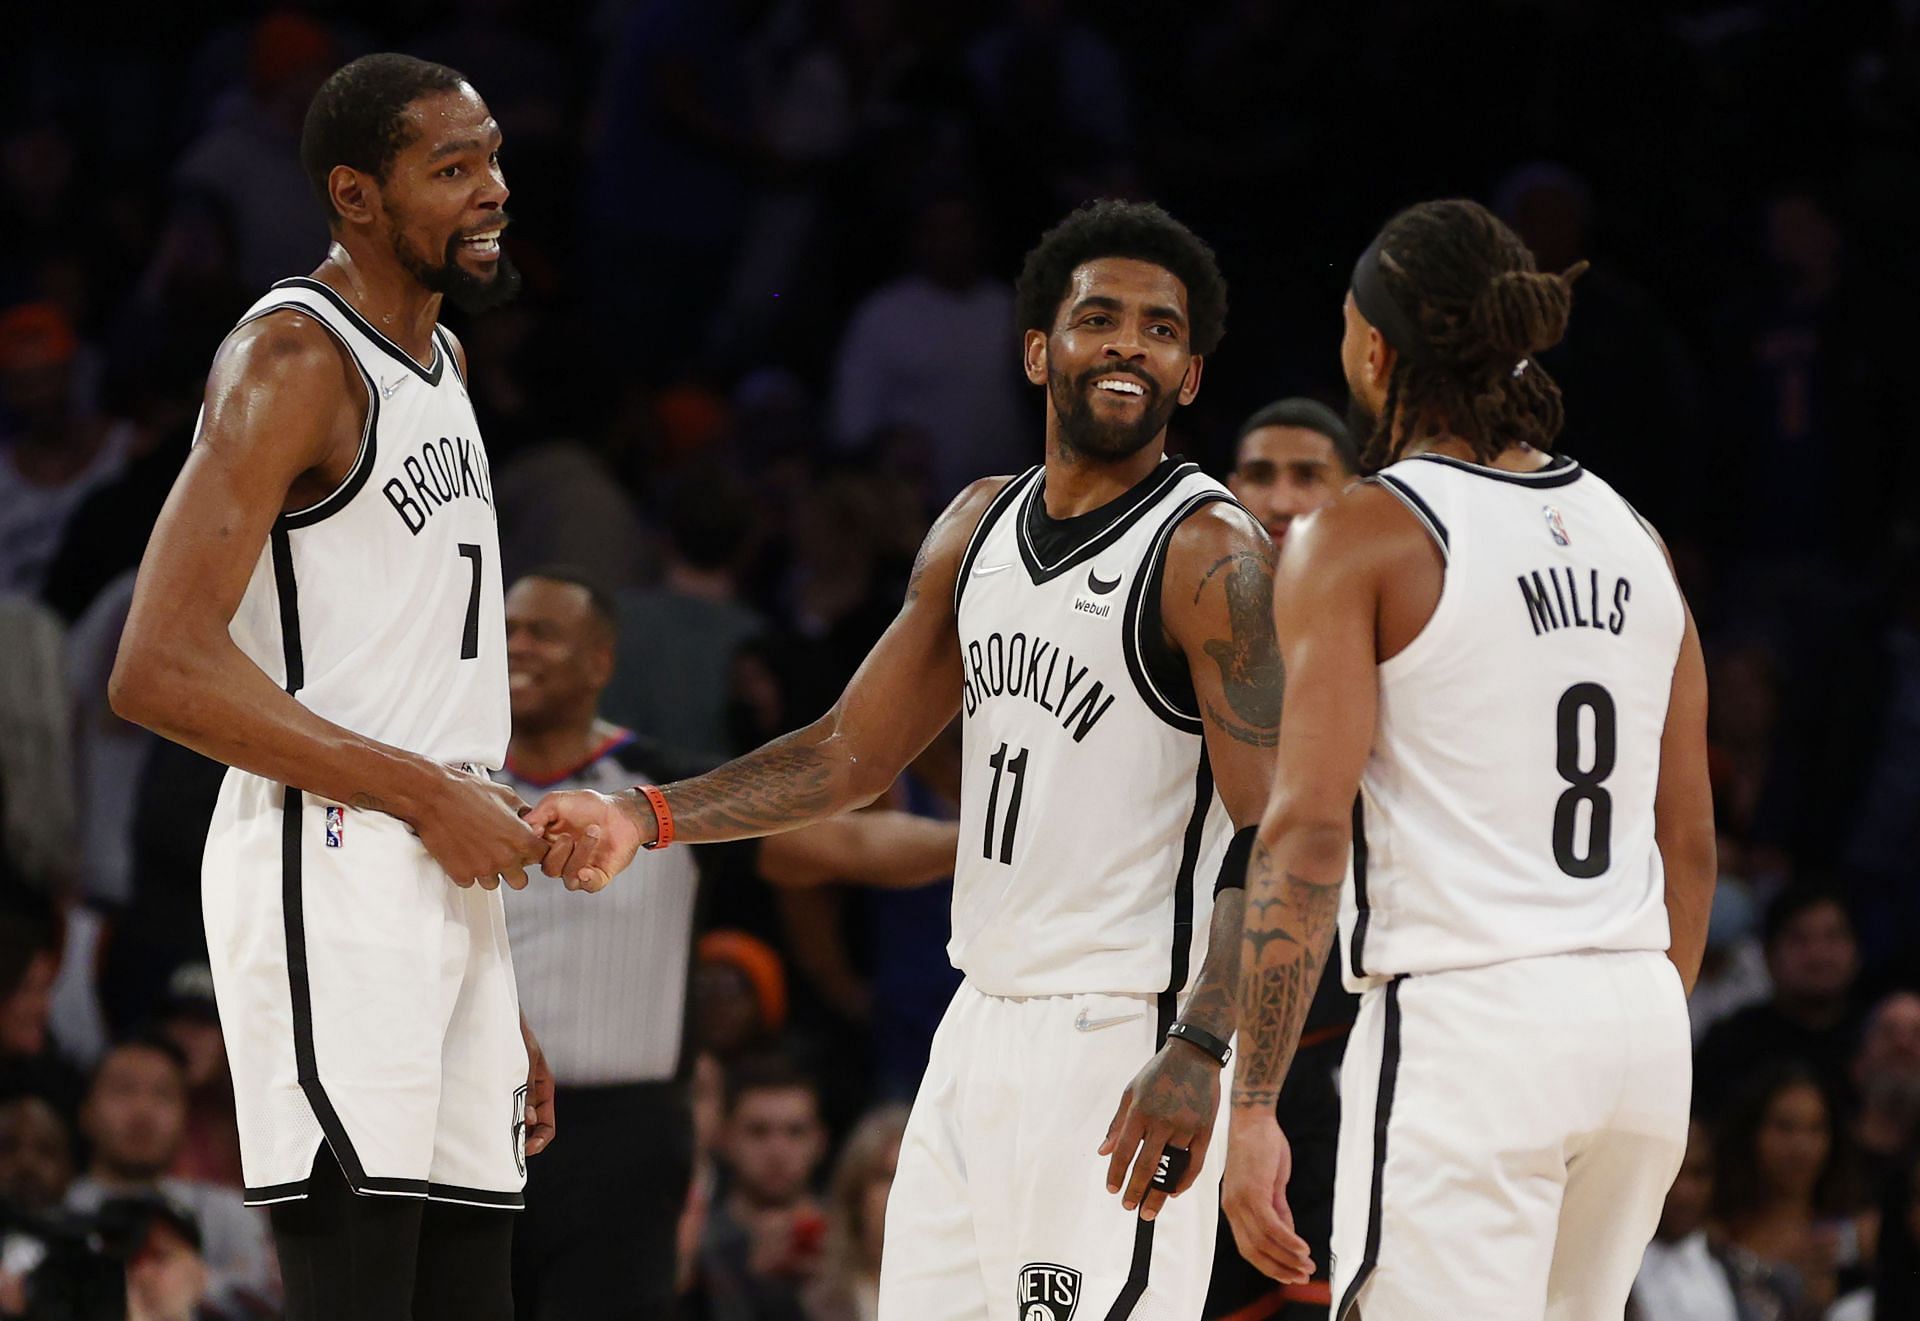 Kevin Durant (left), Kyrie Irving (middle), and Patty Mills of the Brooklyn Nets